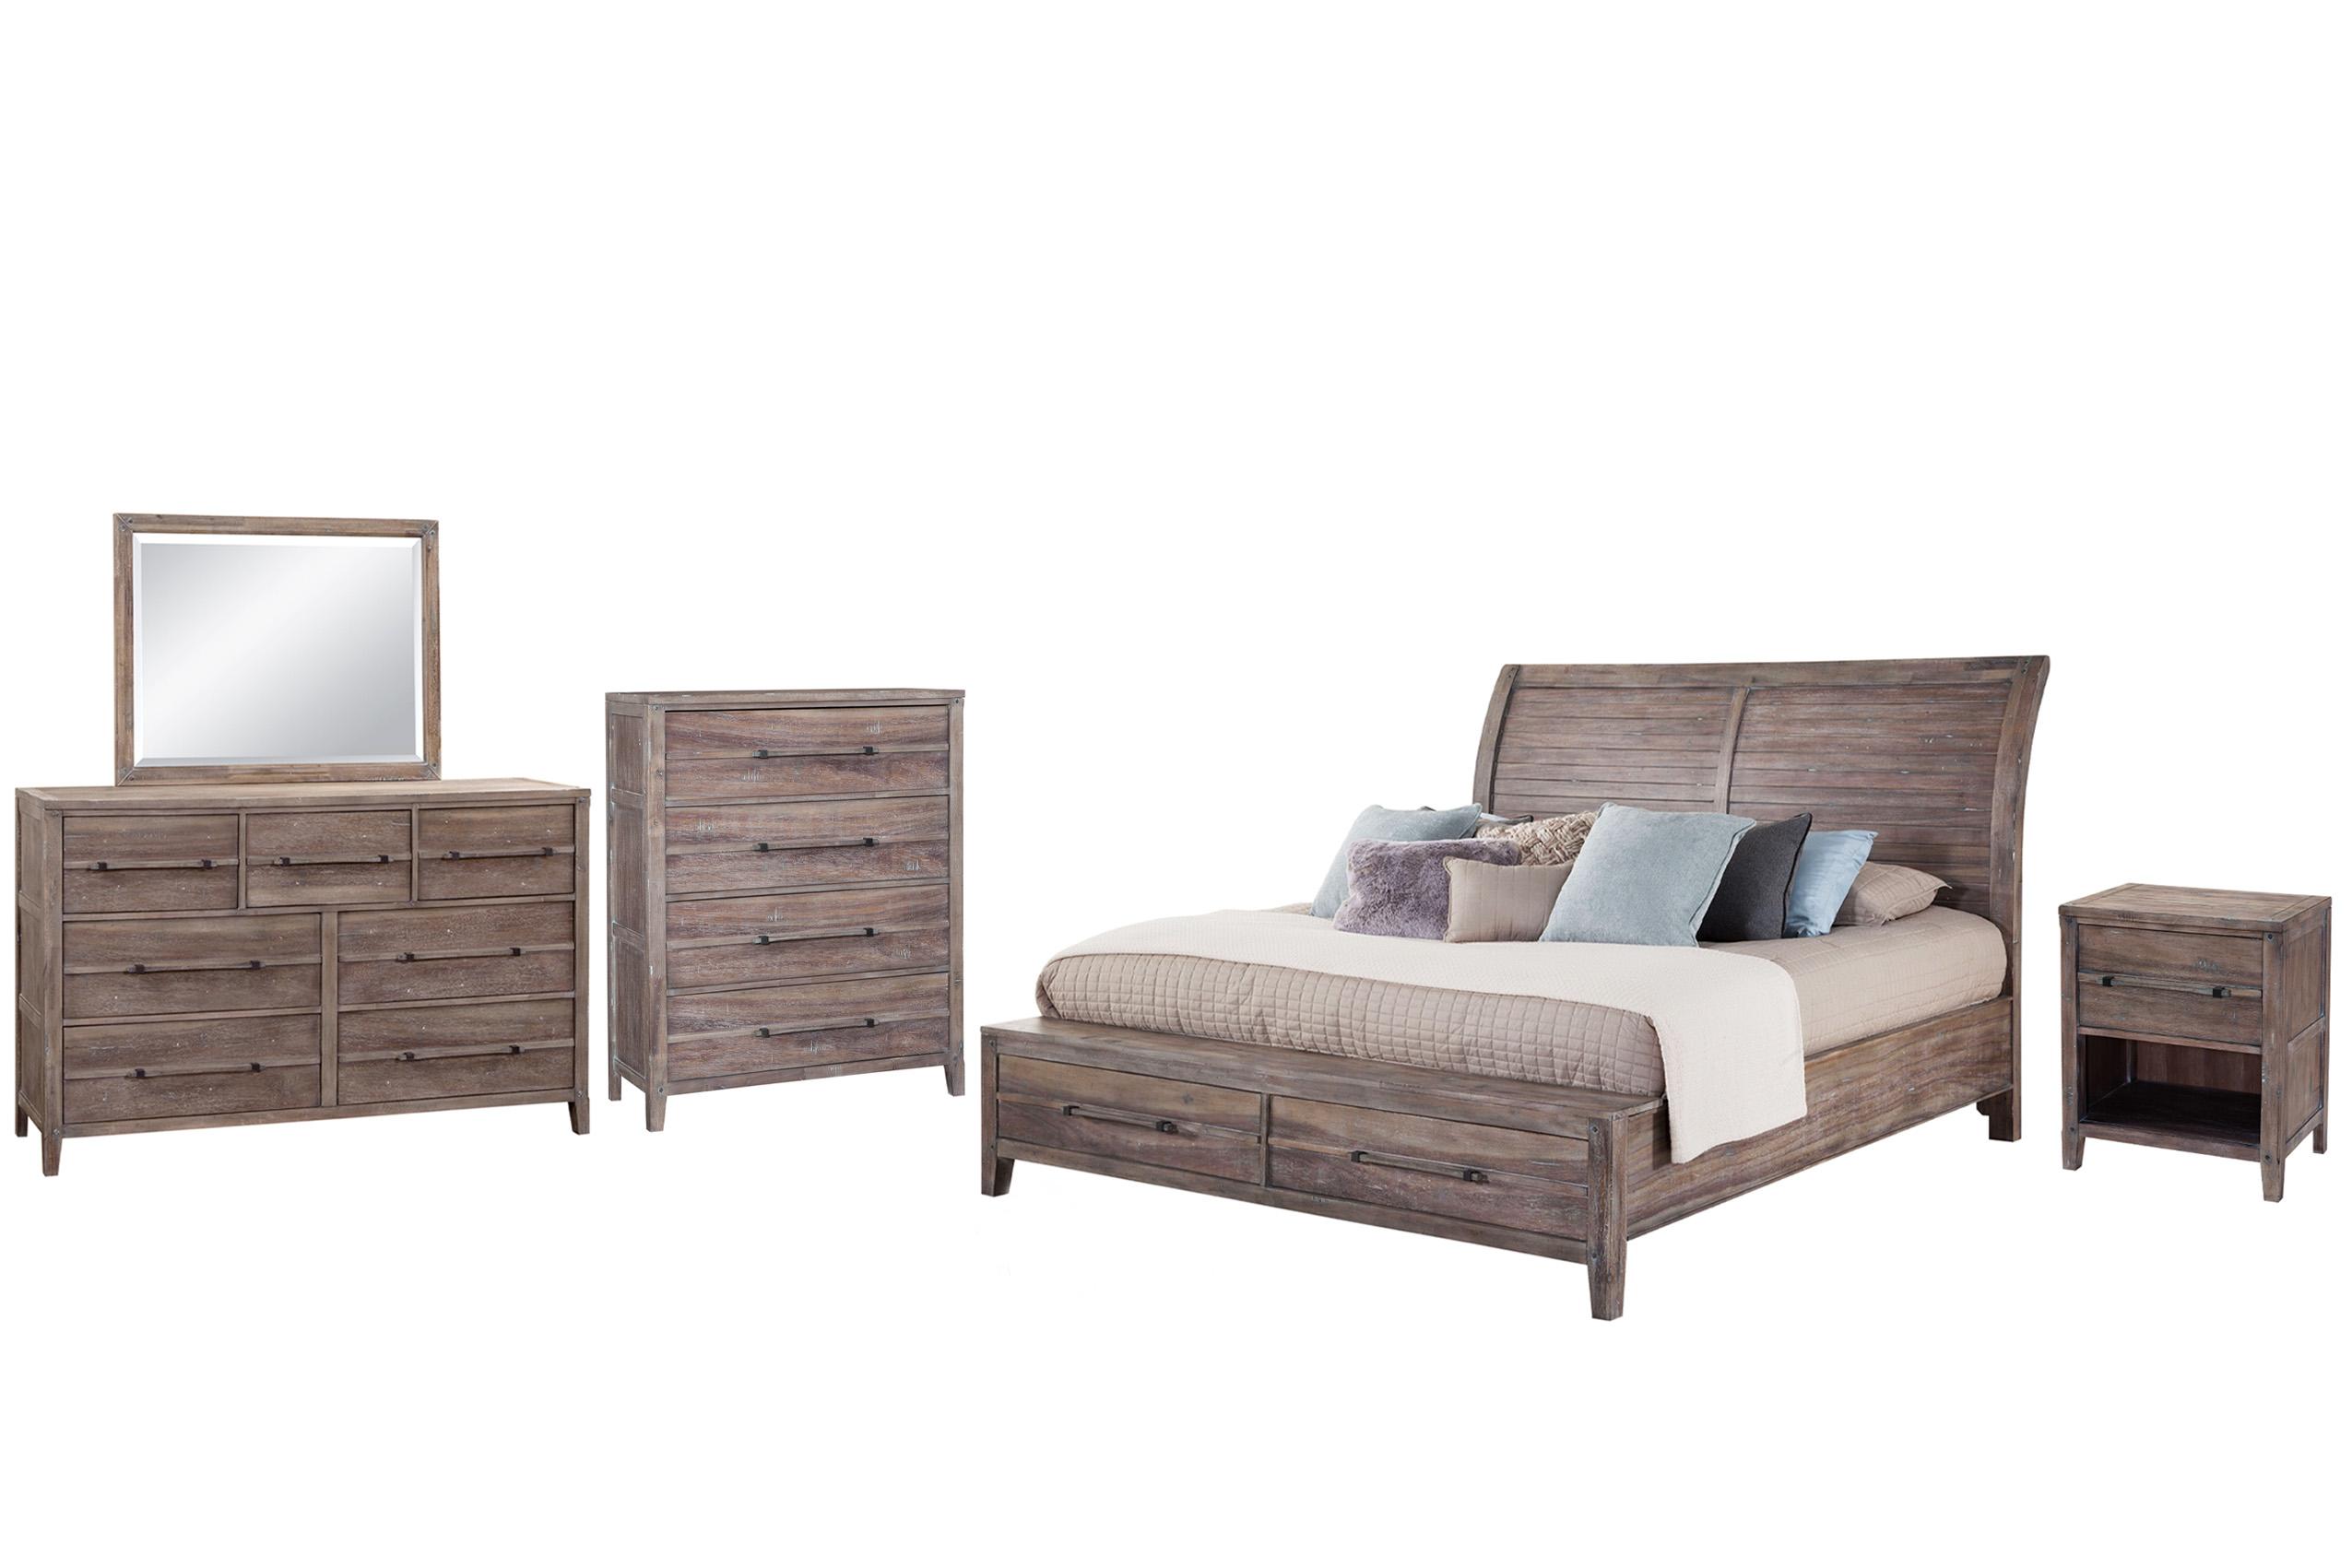 Classic, Traditional Sleigh Bedroom Set AURORA 2800-50SLES 2800-QSLST-5PC in Driftwood, Gray 